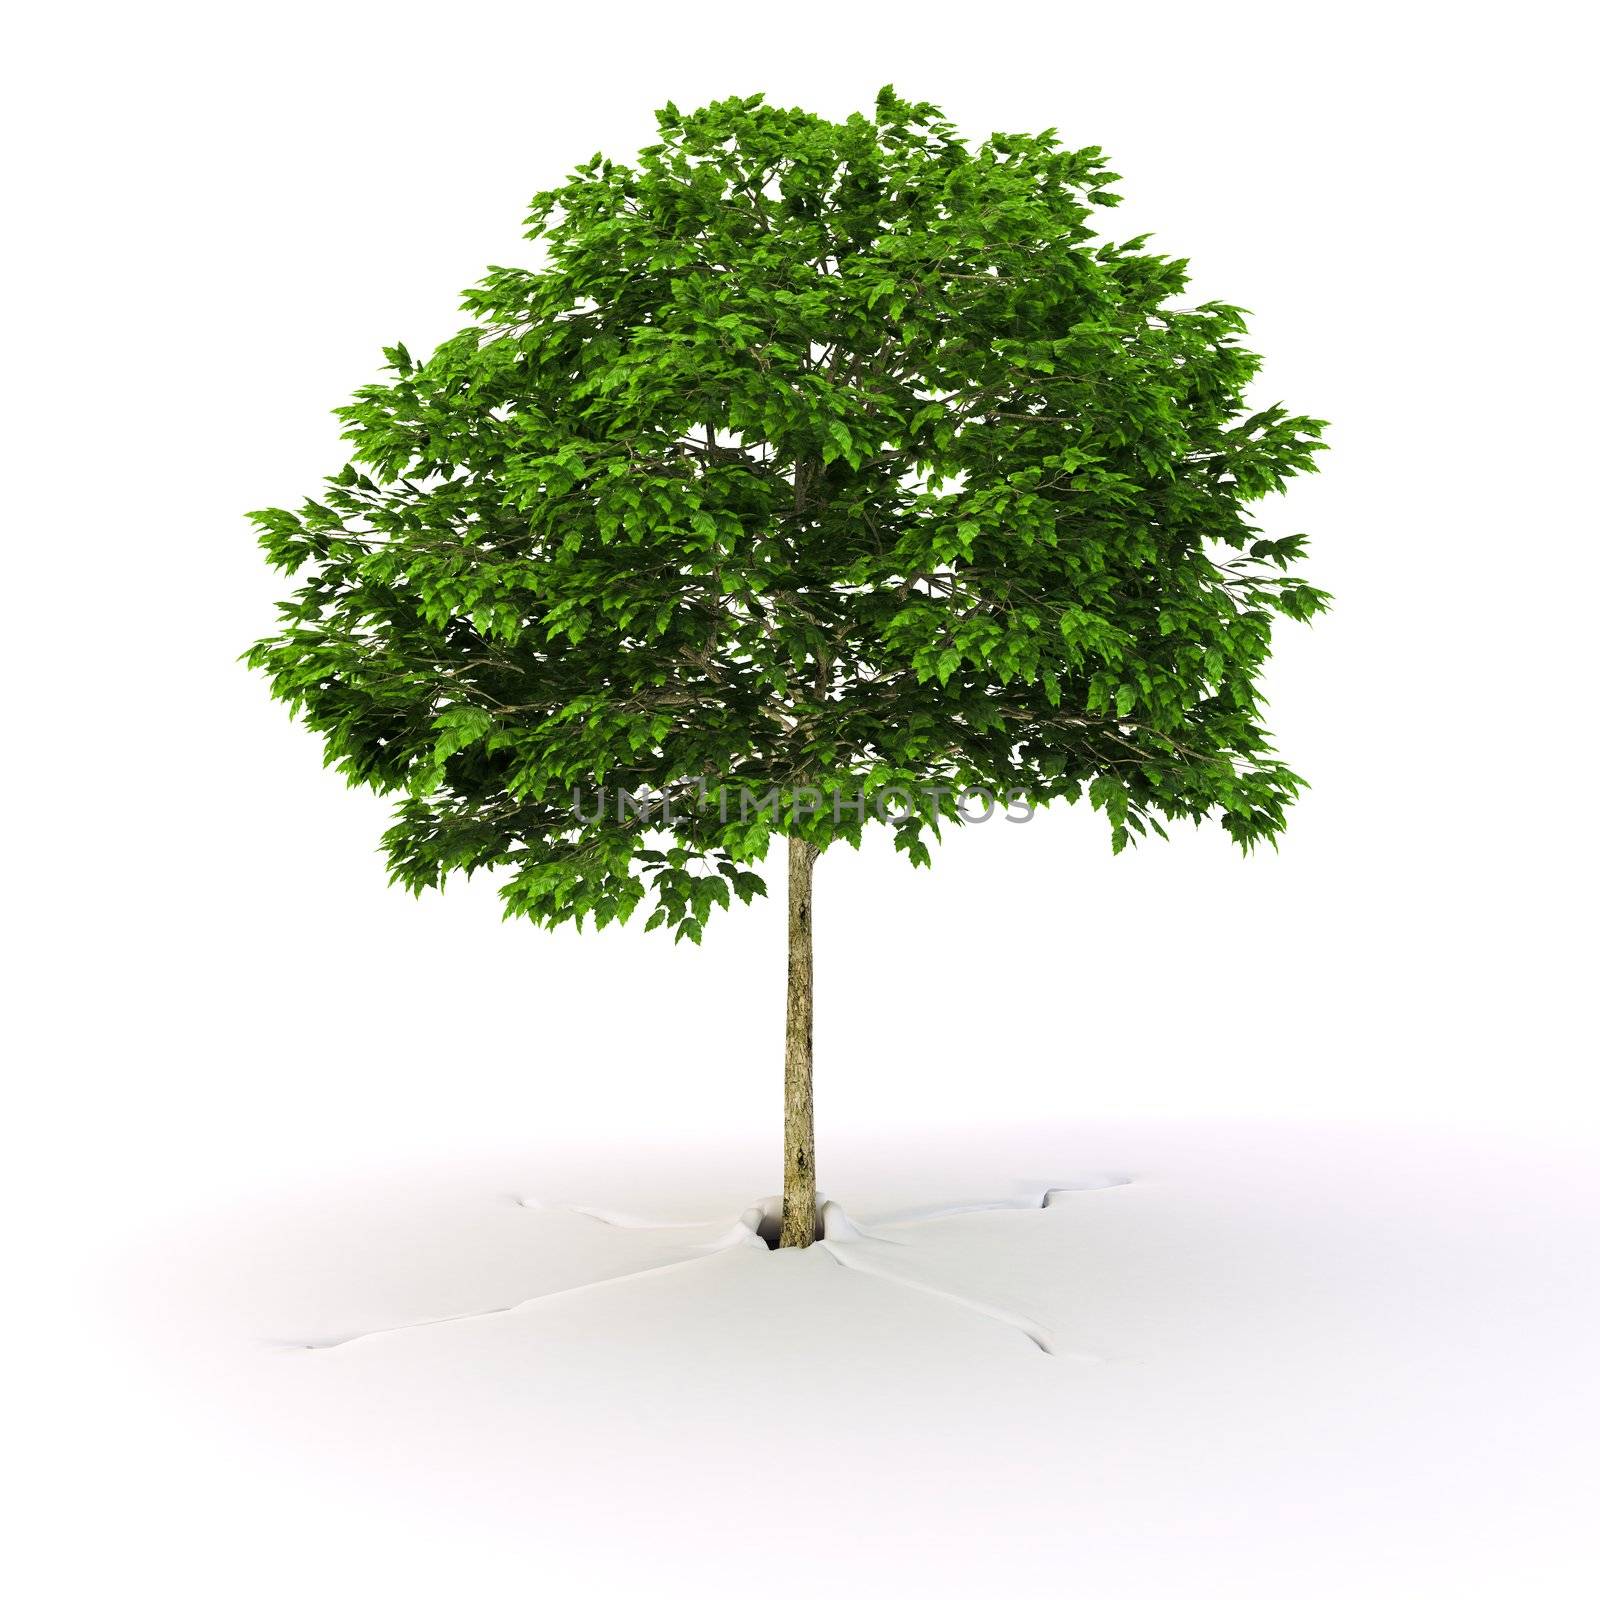 Green tree grow from ground on white background